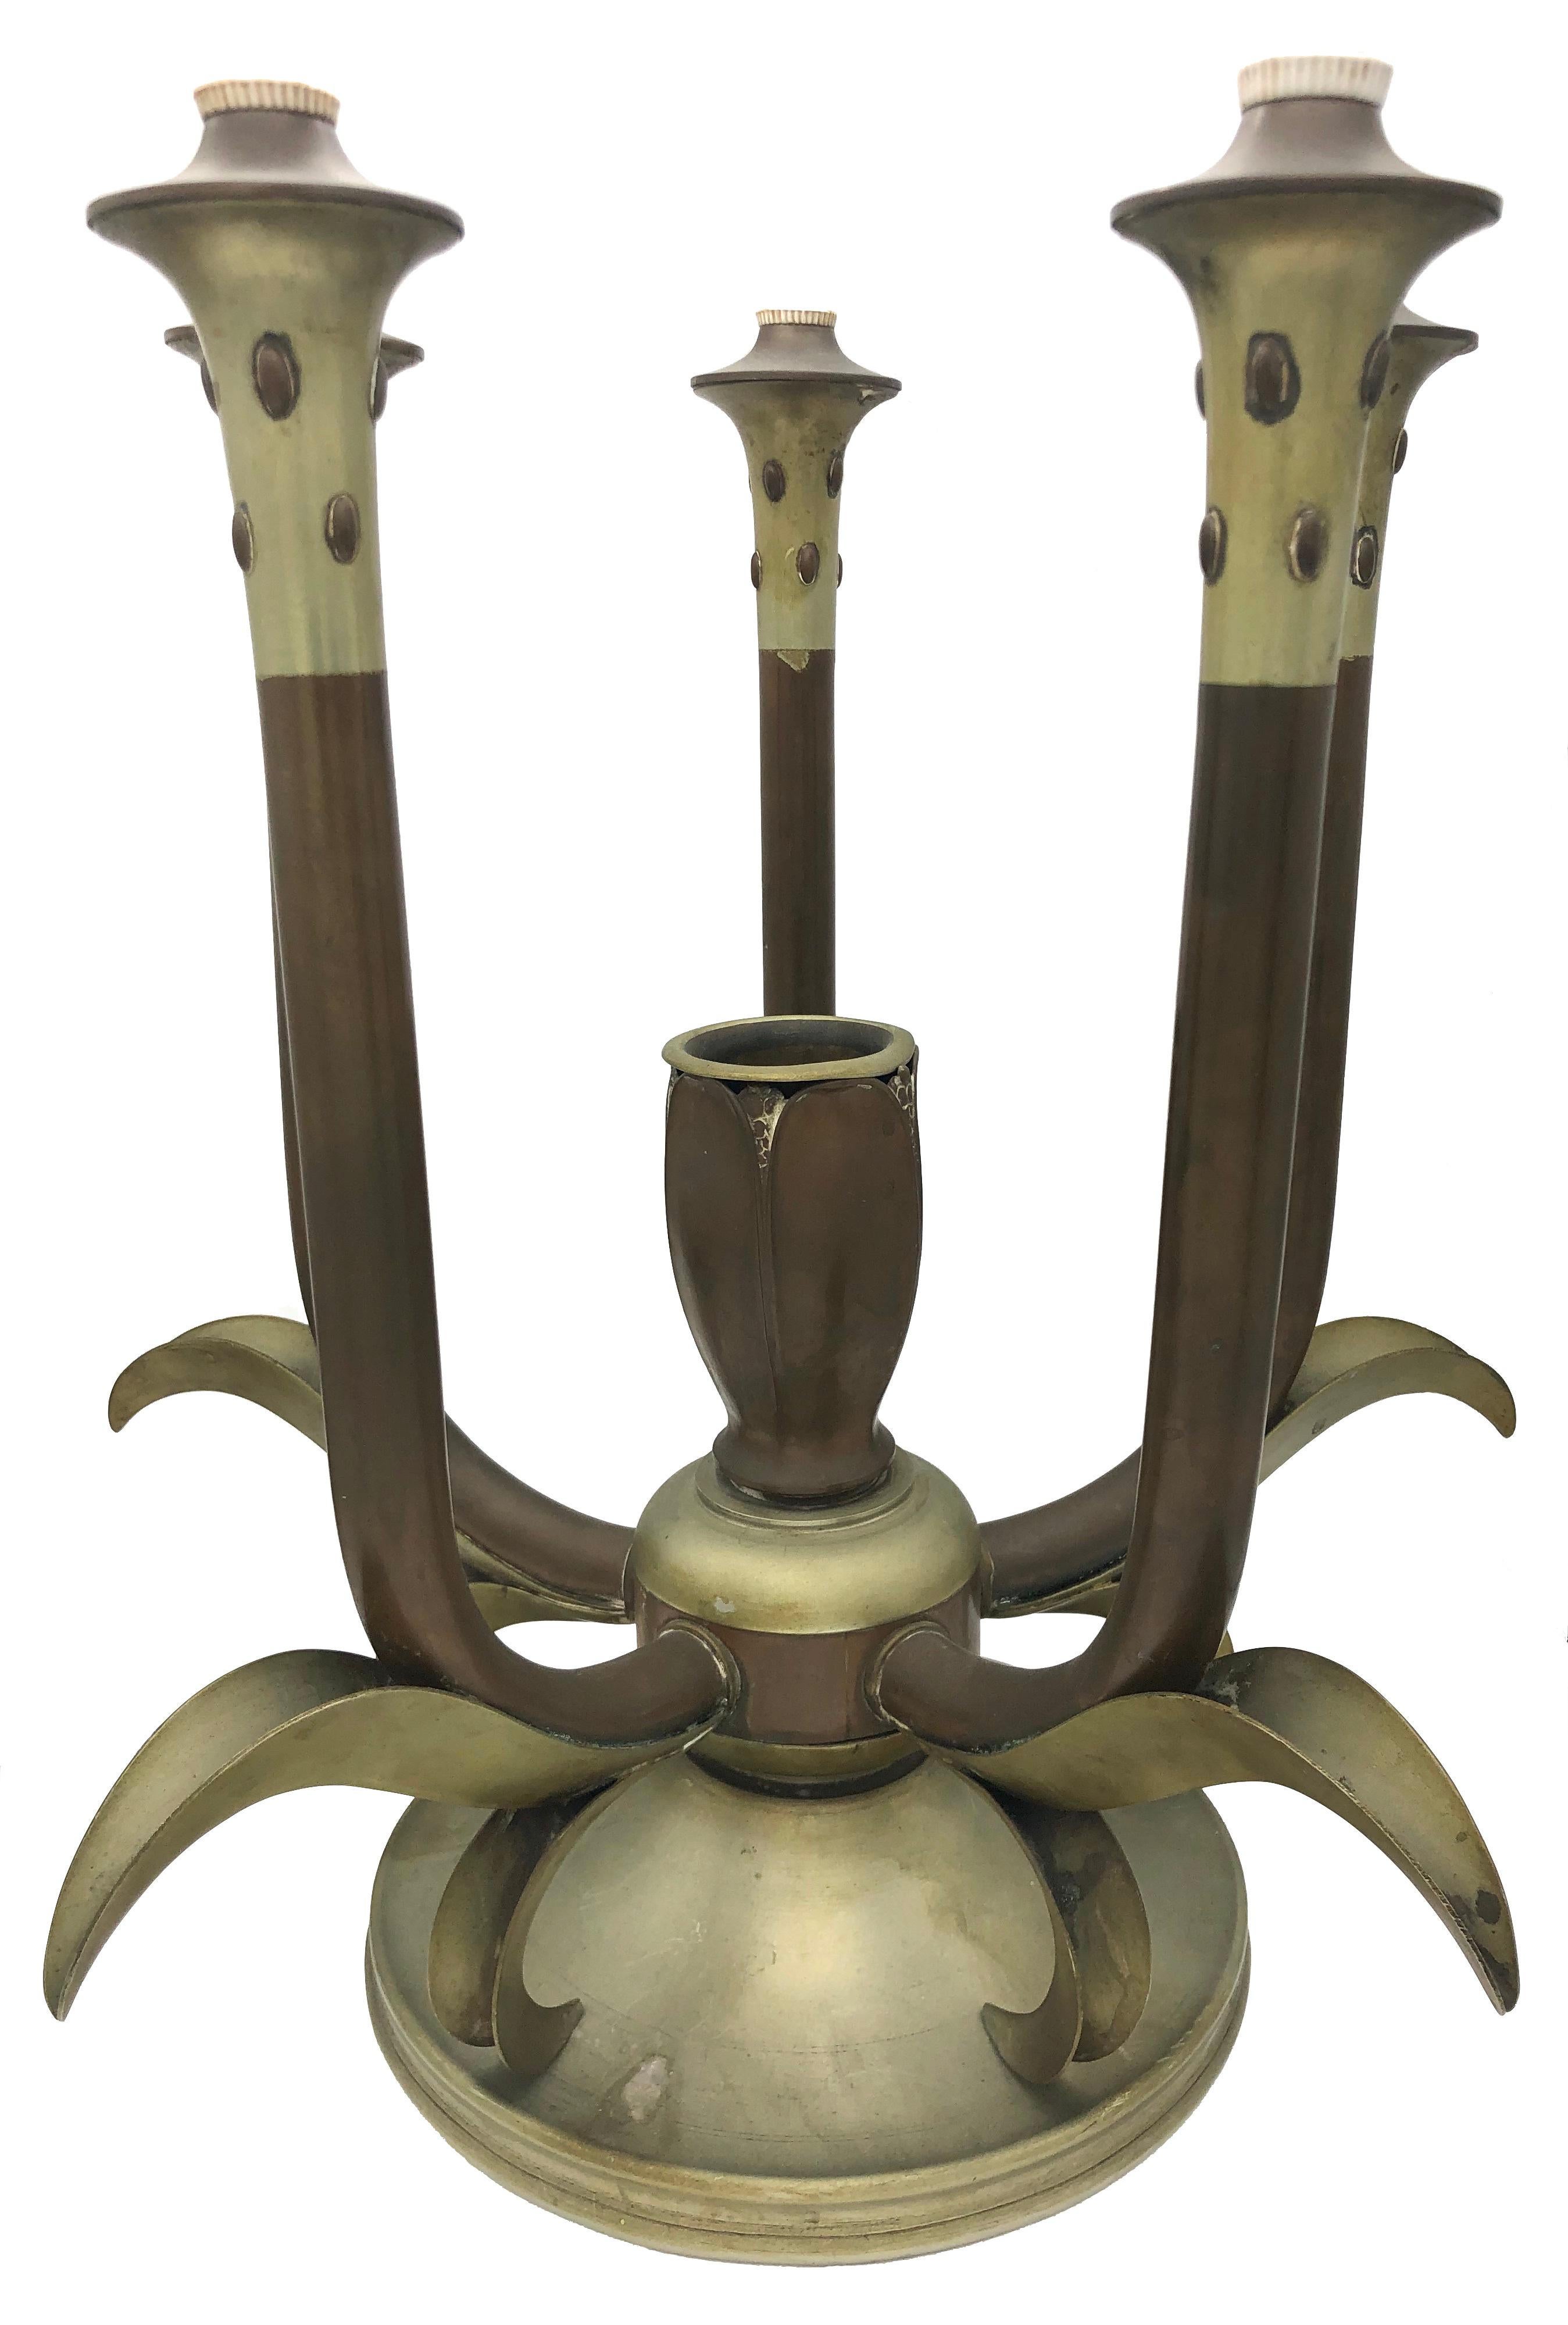 Expressive Art Deco table lamp with five arms made out of two colored metal in its original condition. The design has is reminiscent of flowers and leaves.